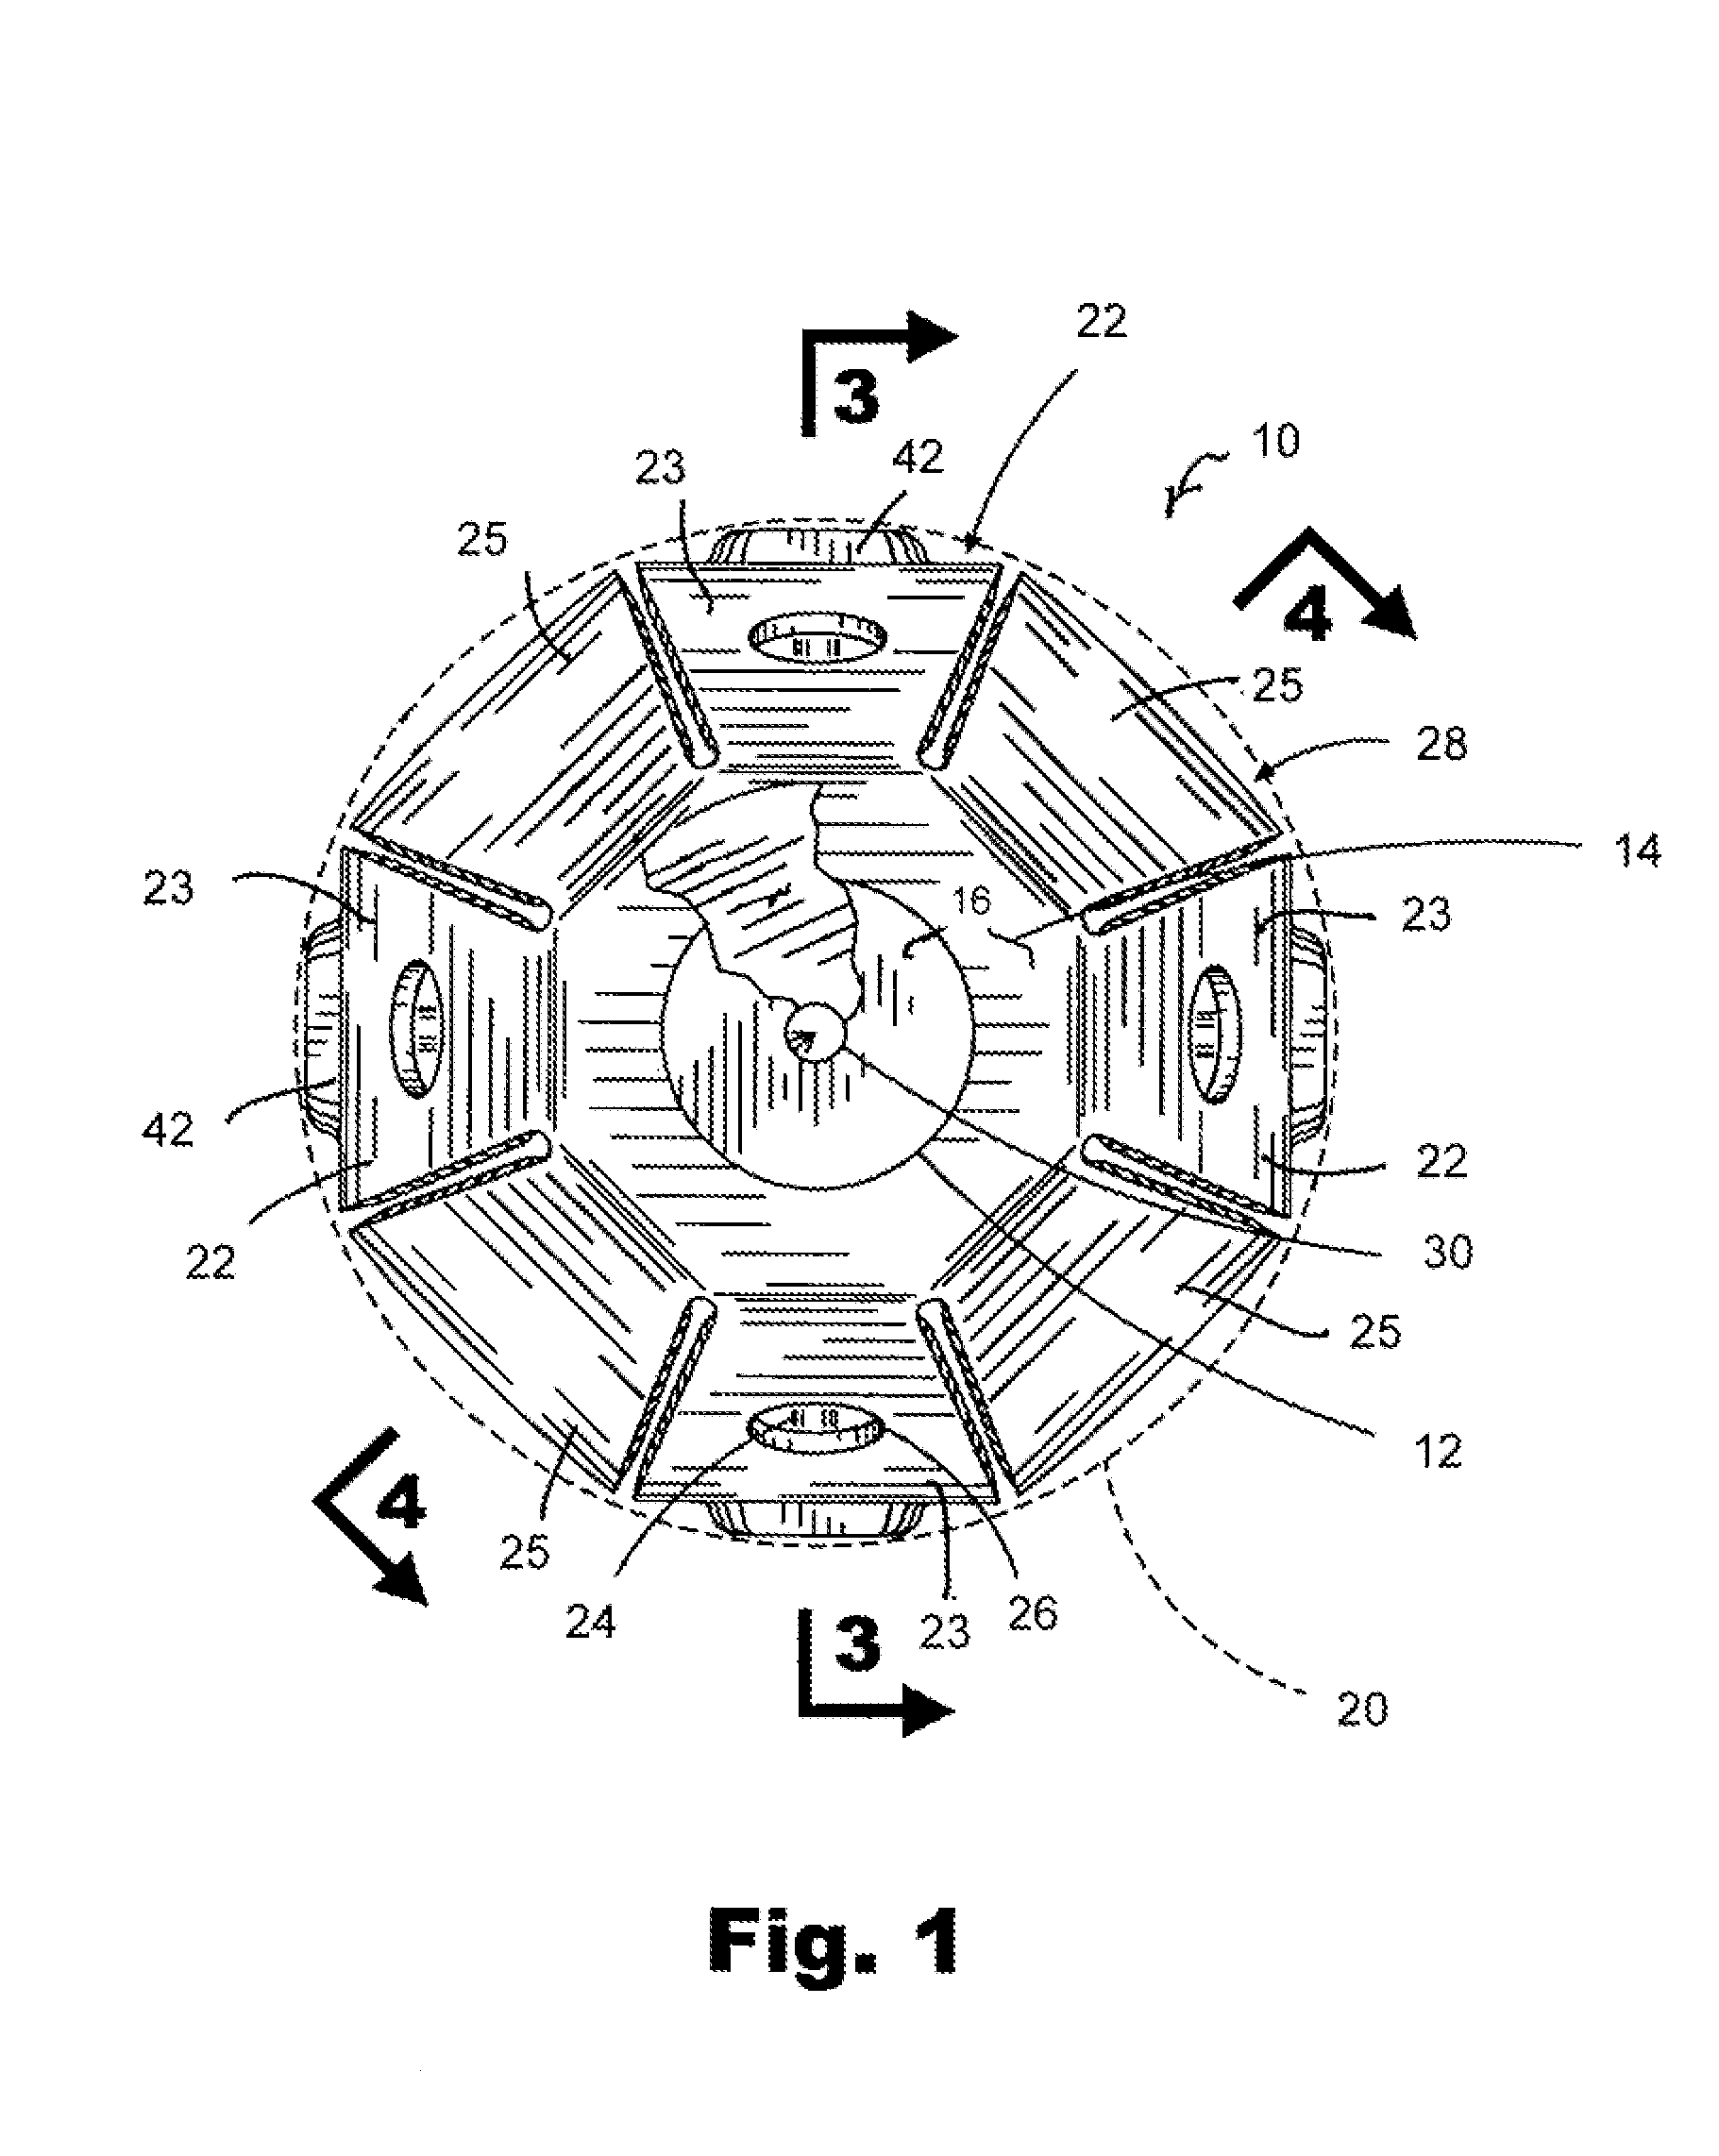 Electricity-inducing immobilization cartridge attachment